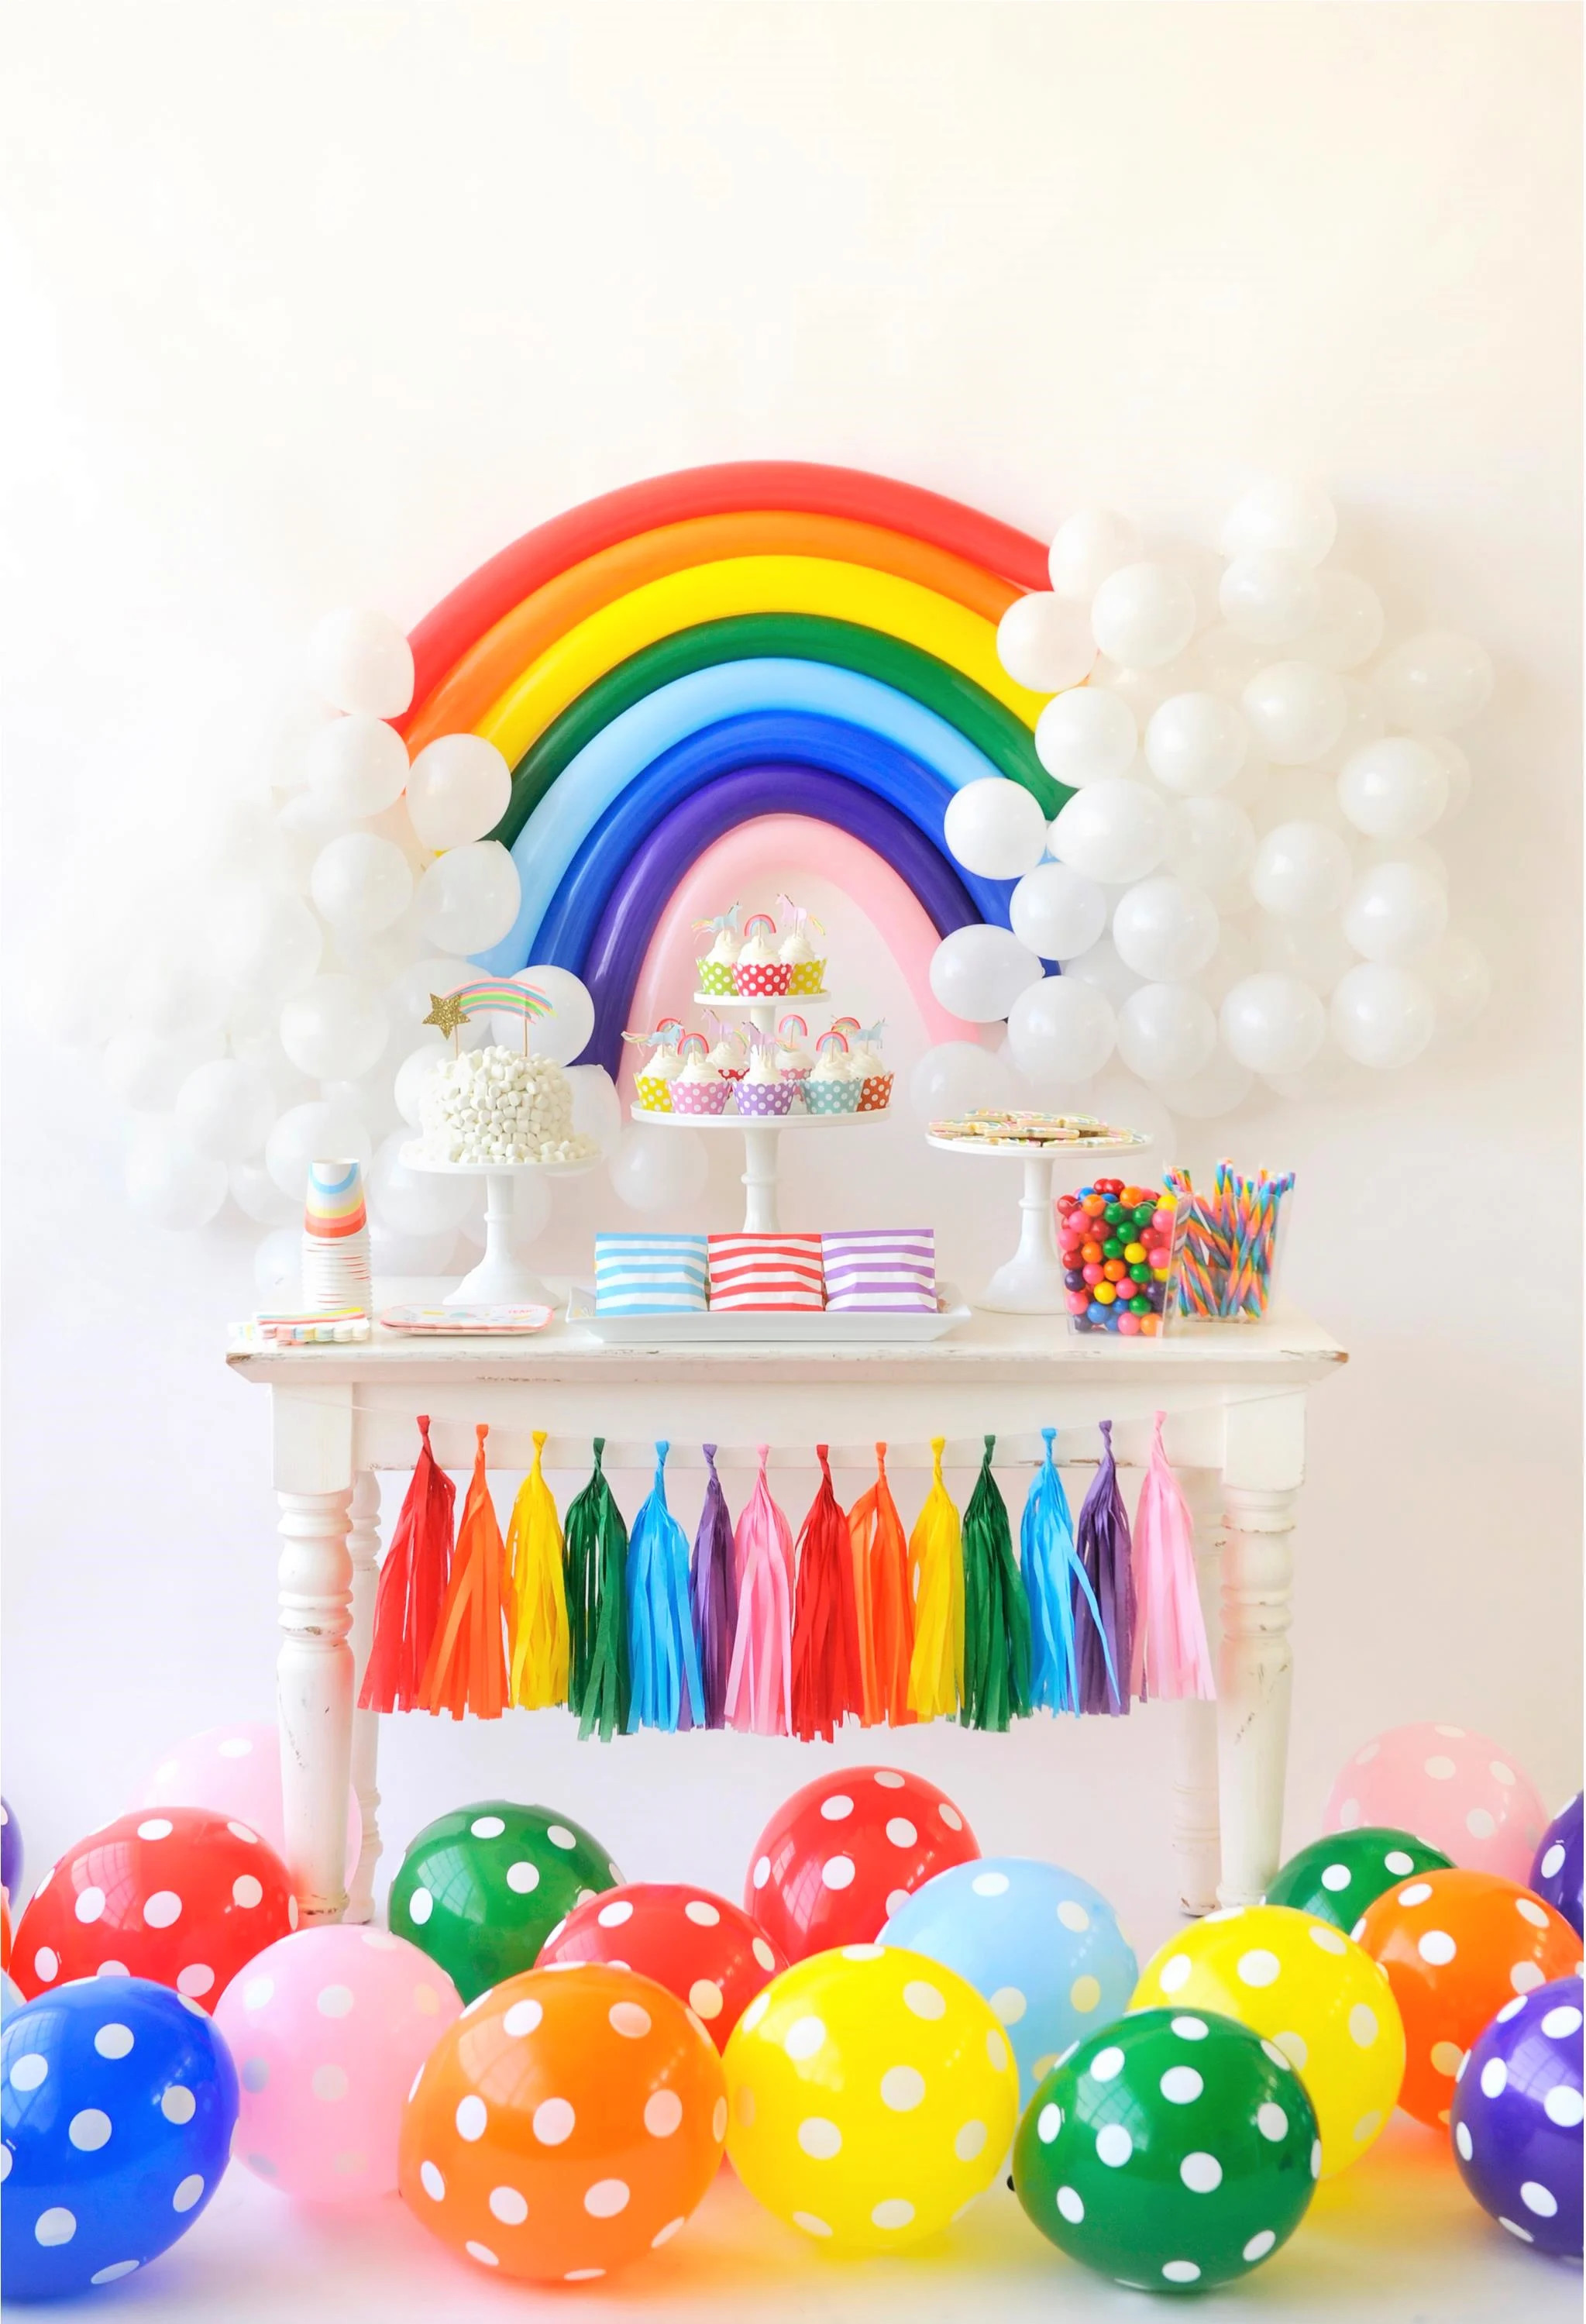 Party Time! 45 Creative Ideas For First Birthdays  Baby birthday  decorations, Boy birthday decorations, Birthday balloon decorations